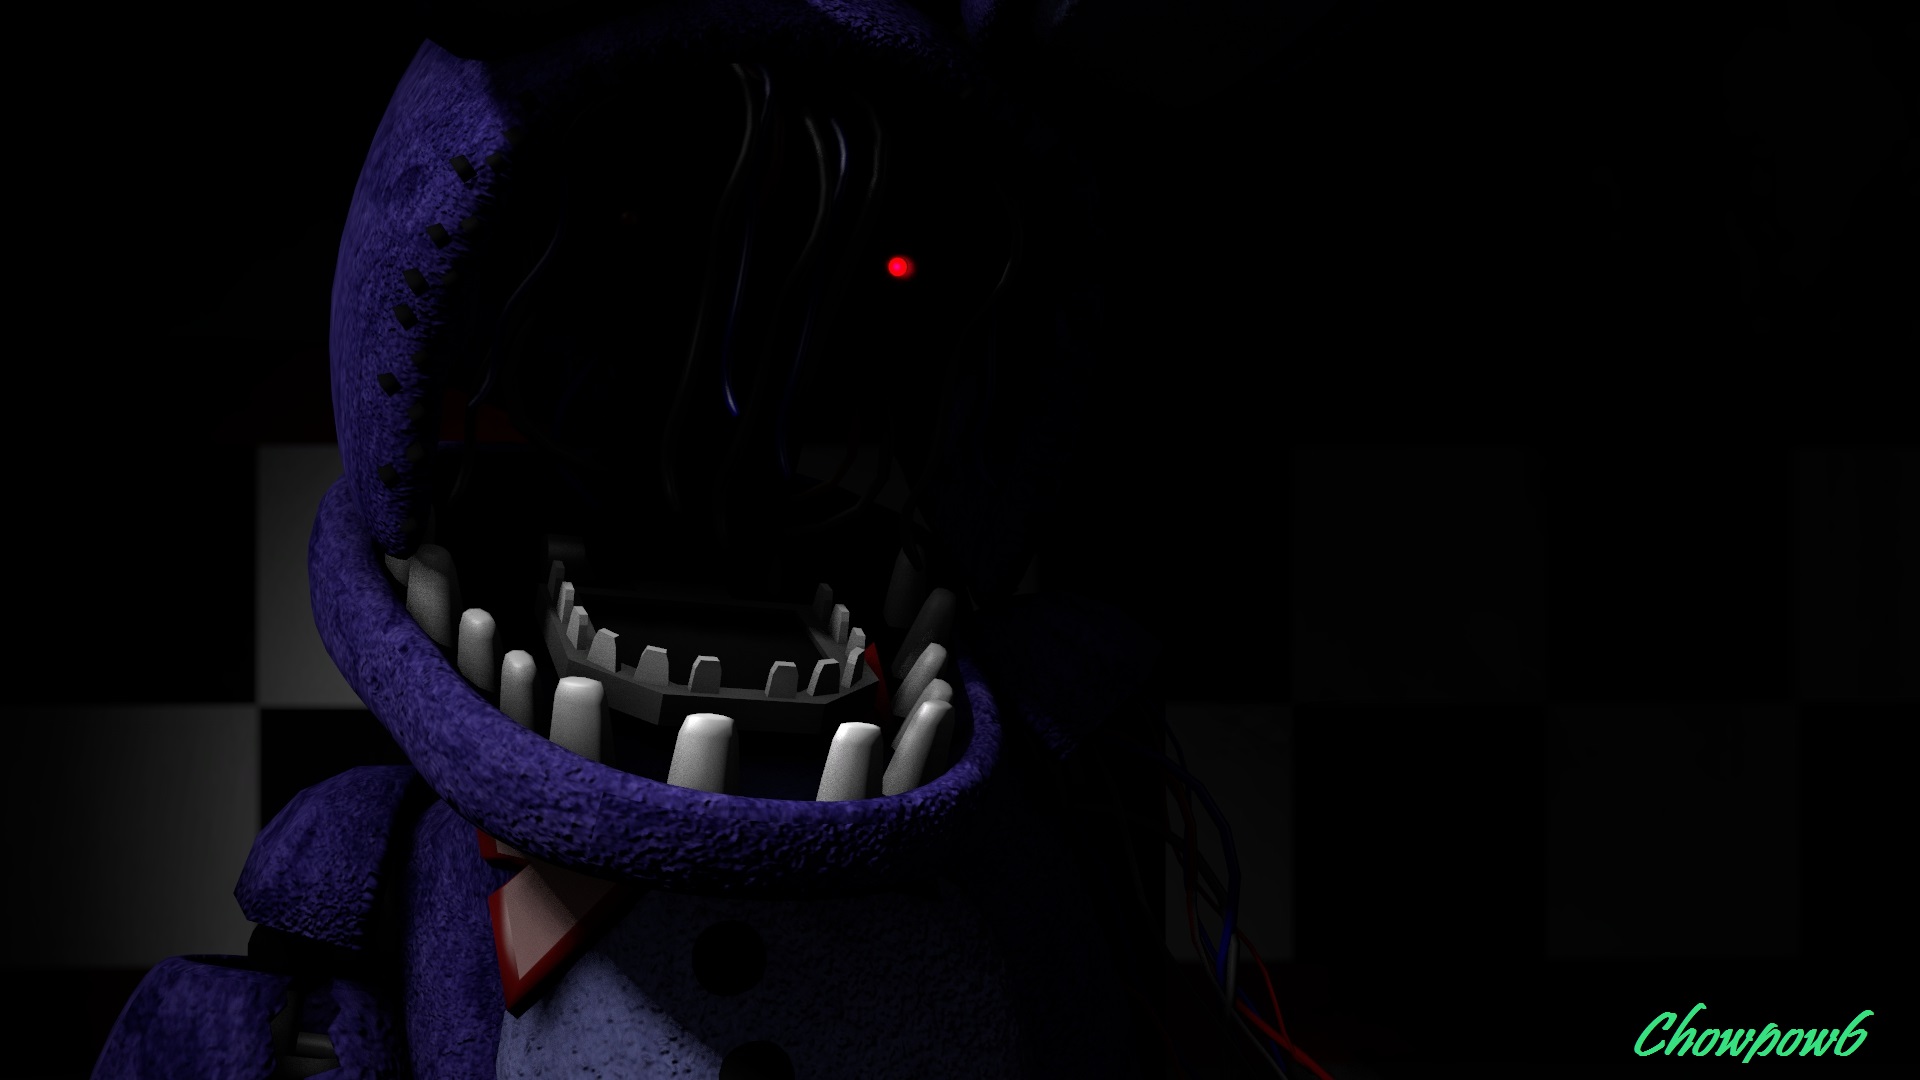 Withered Bonnie ~ Where's my face? :c (SFM) by Chowie333 on DeviantArt